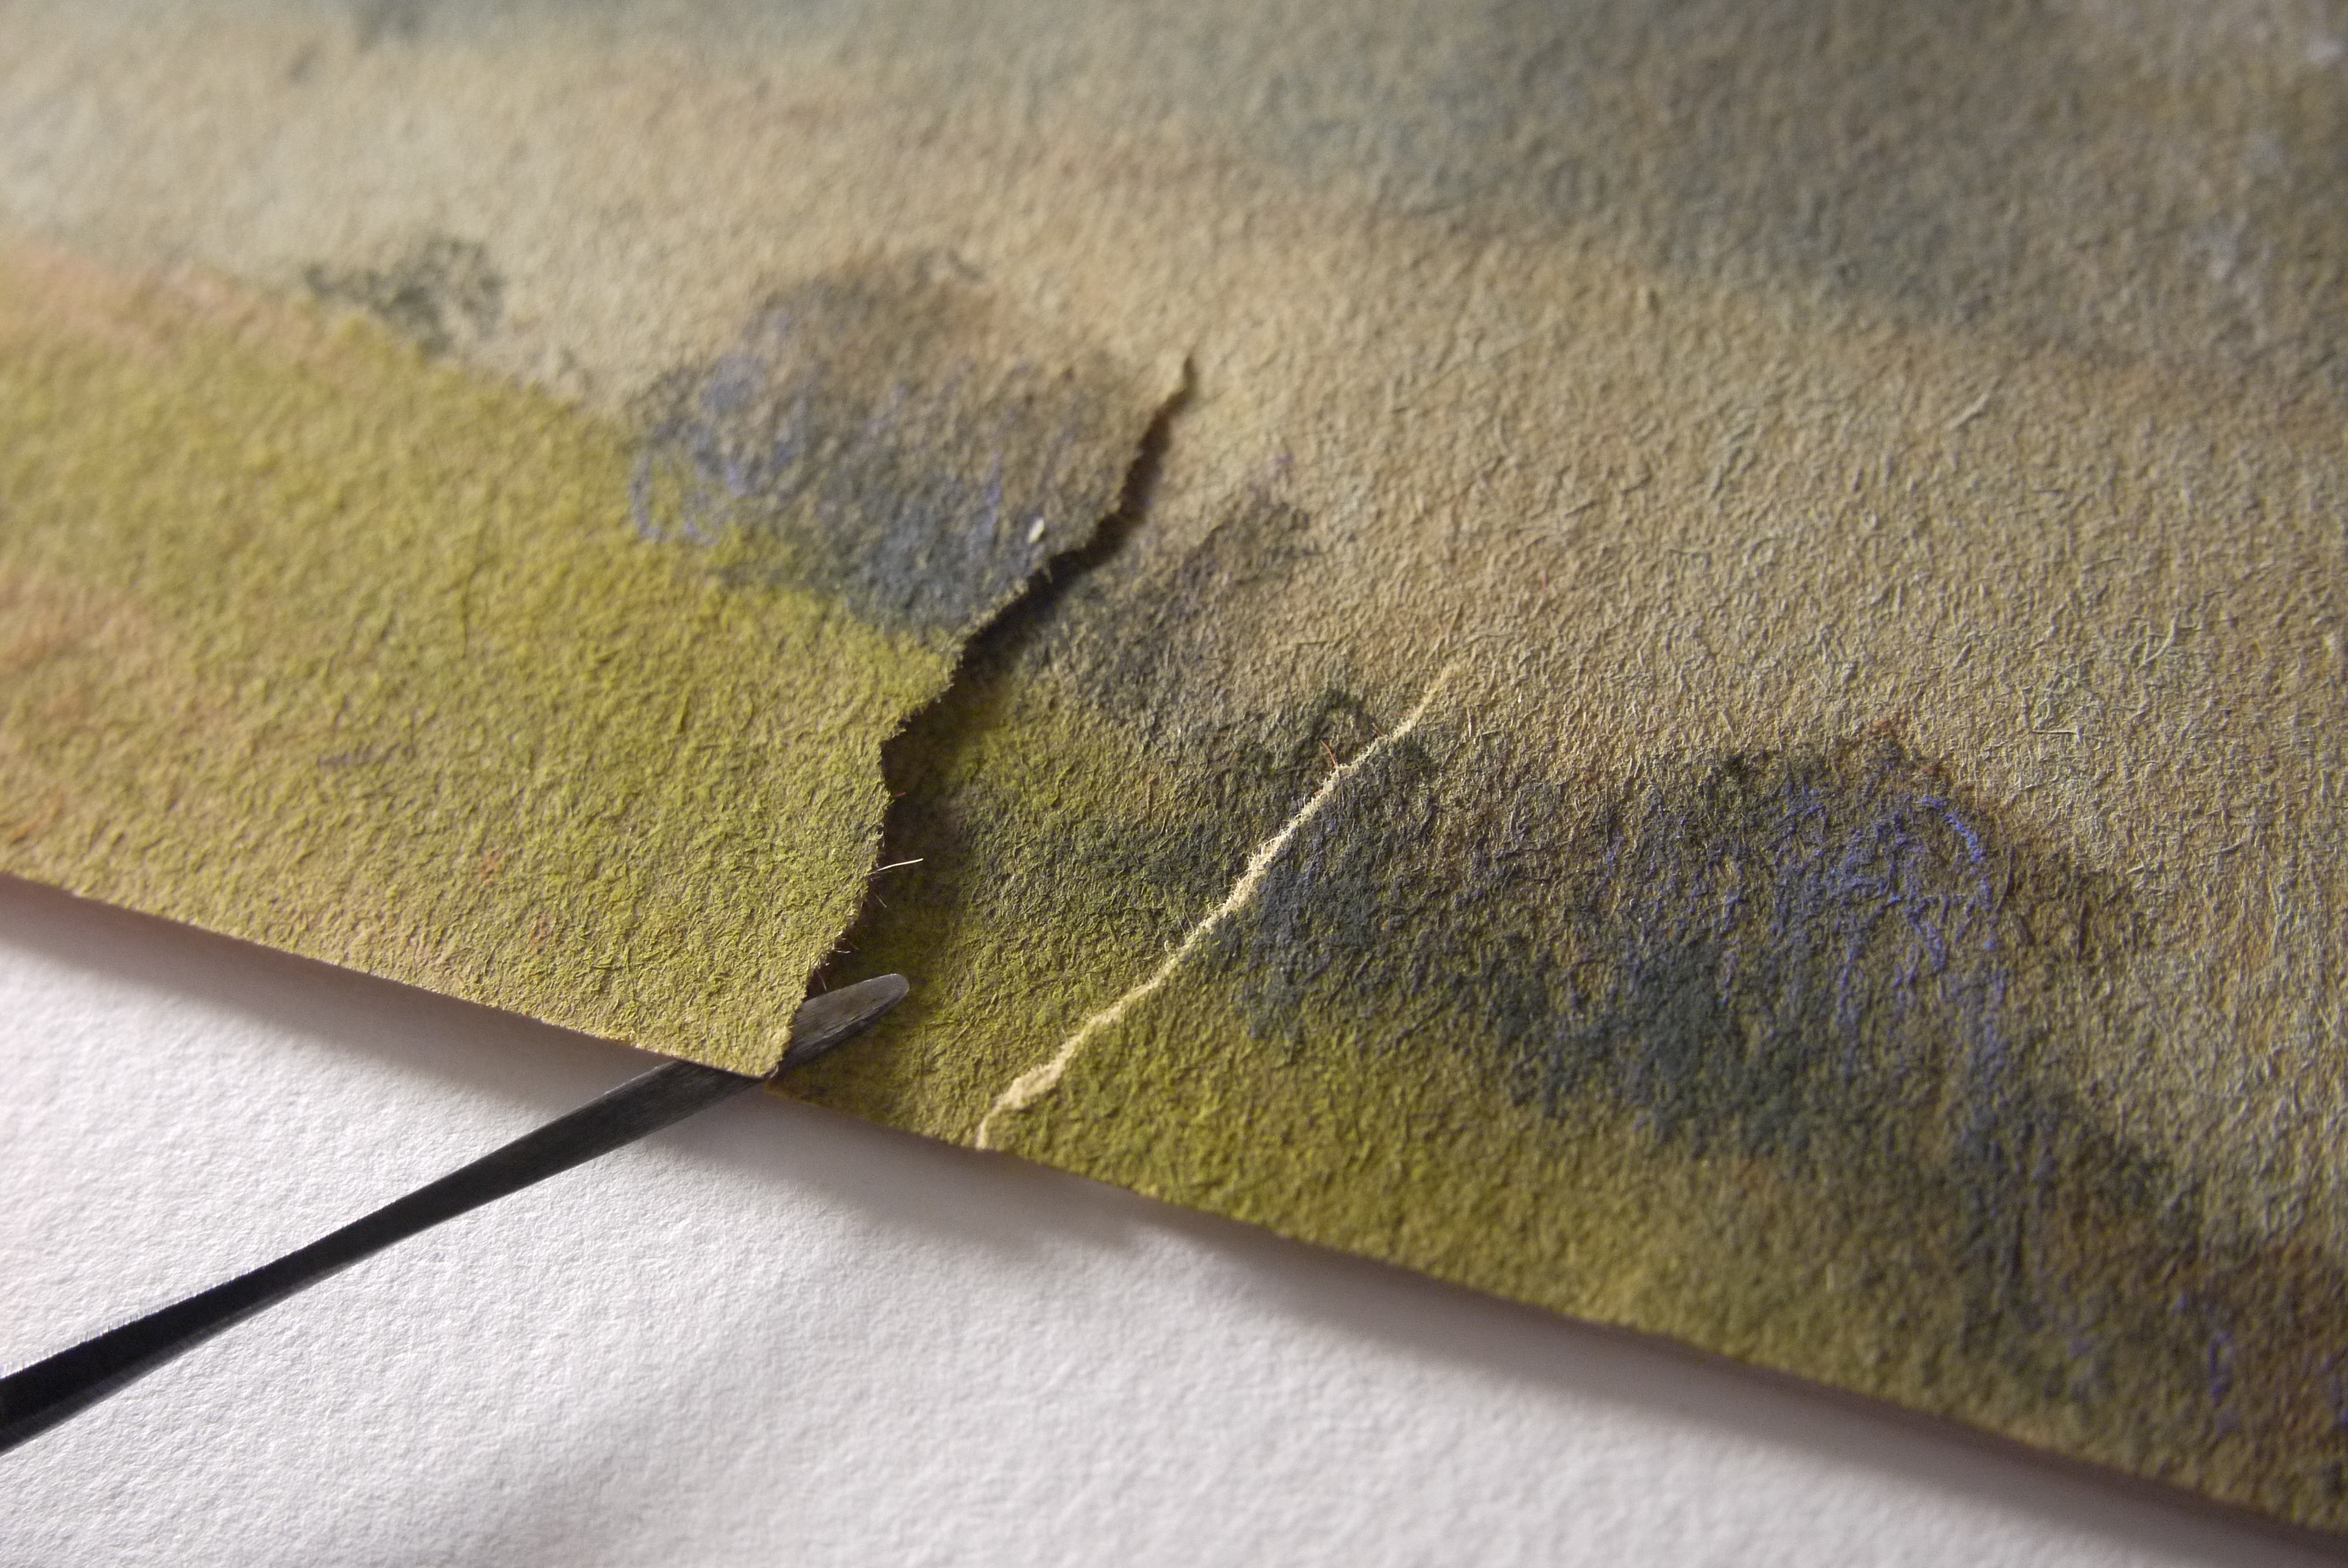 A close-up photo of a torn edge of the Cullen drawing, held slightly separated by a slender steel tool held by the conservator